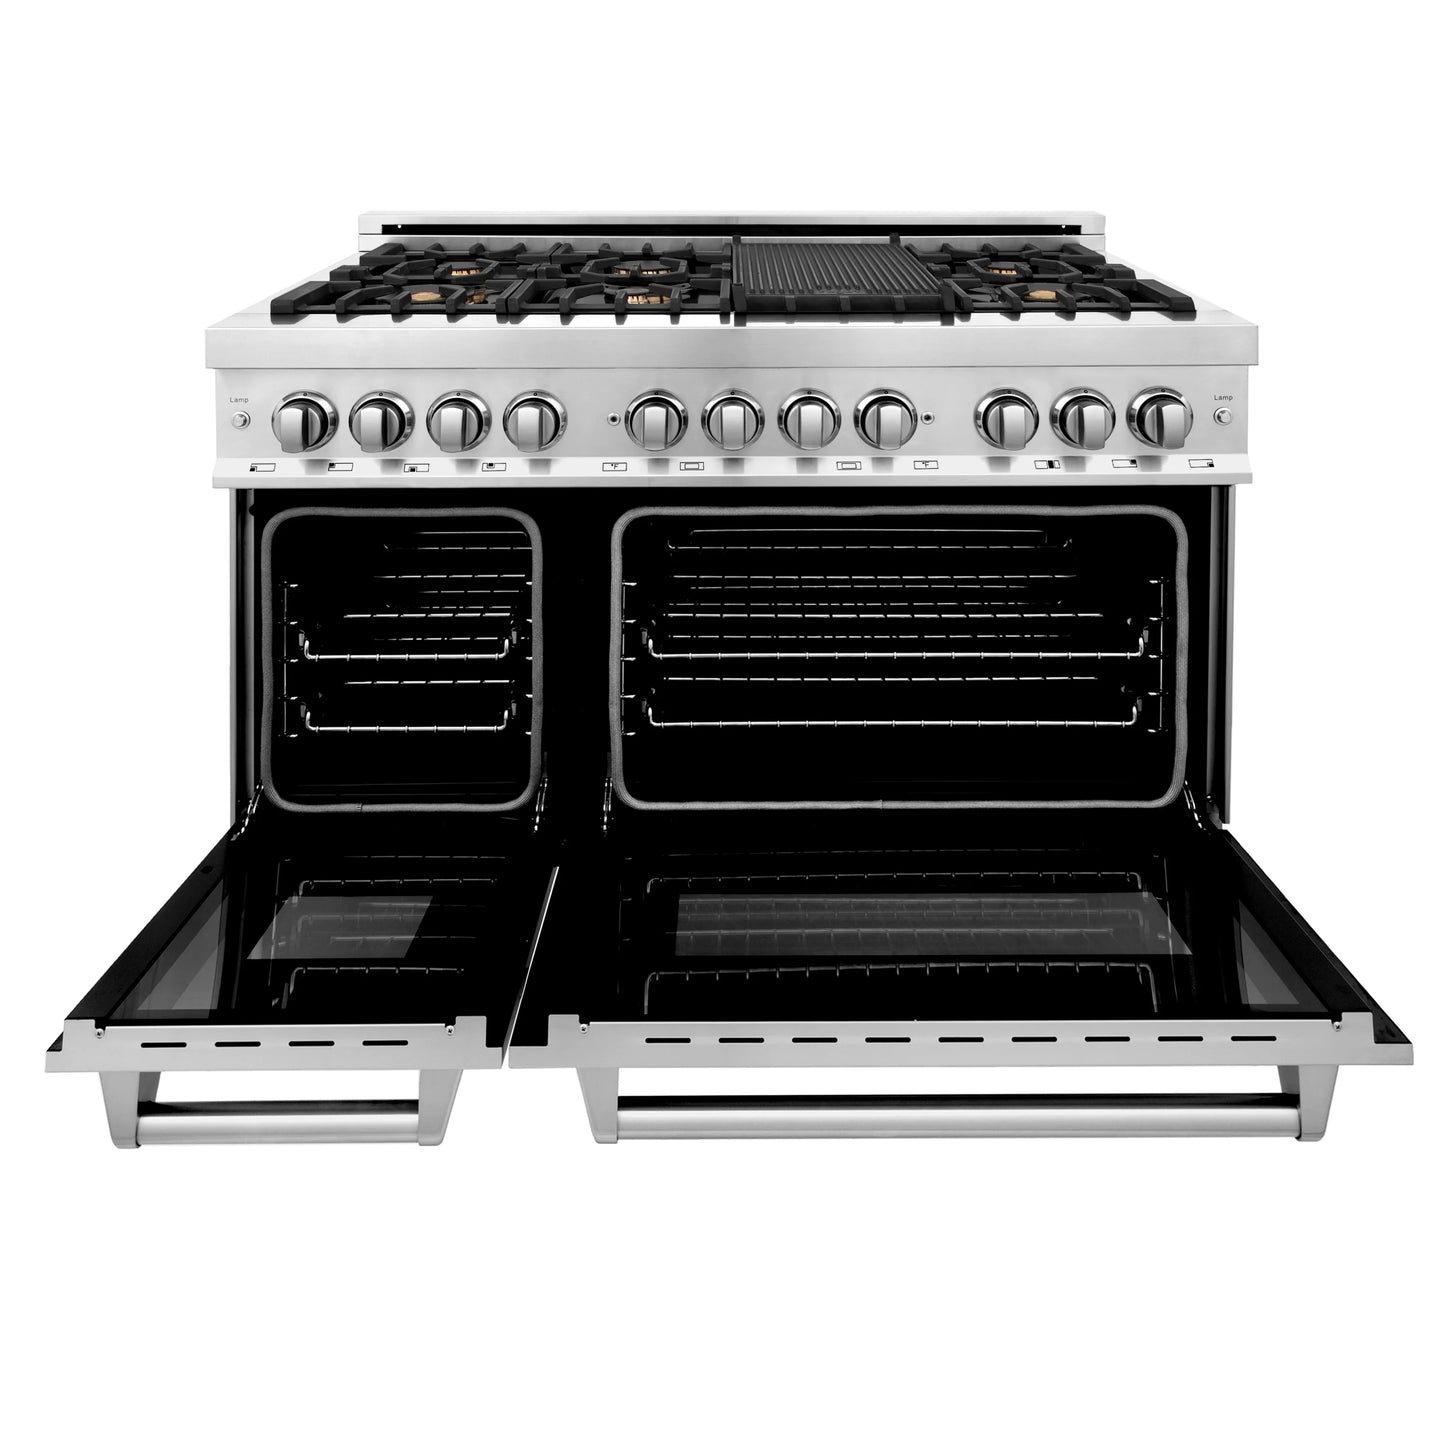 ZLINE 48 in. Dual Fuel Range with Gas Stove and Electric Oven in Stainless Steel and Brass Burners (RA-BR-48)